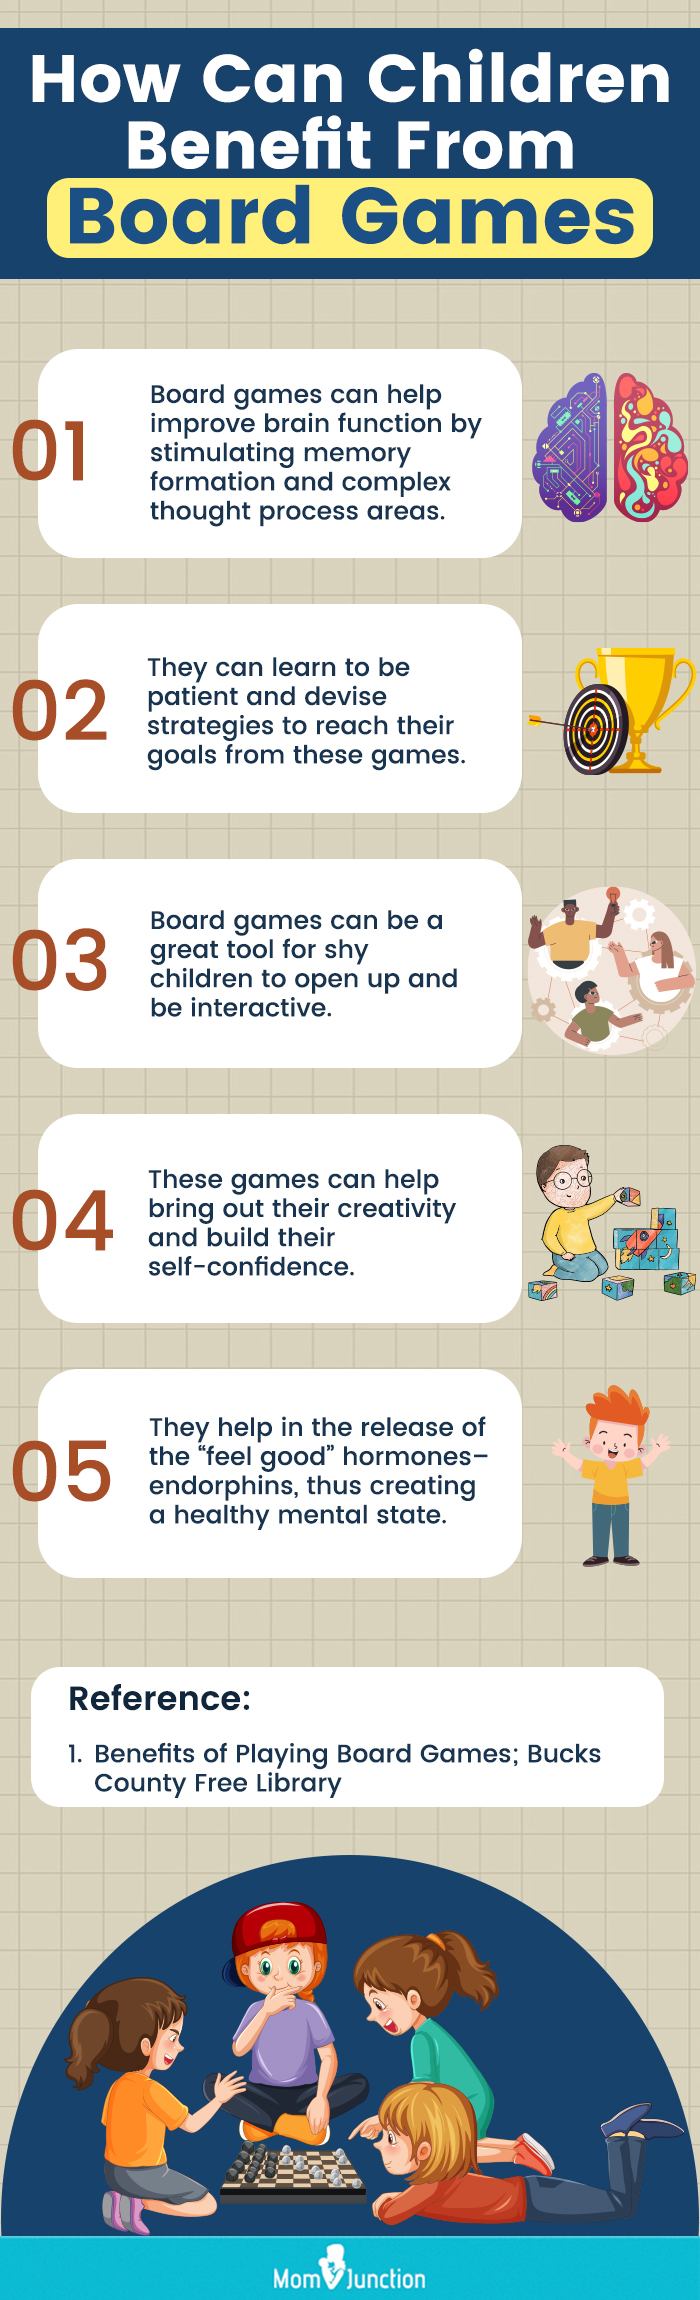 How Can Children Benefit From Board Games (infographic)